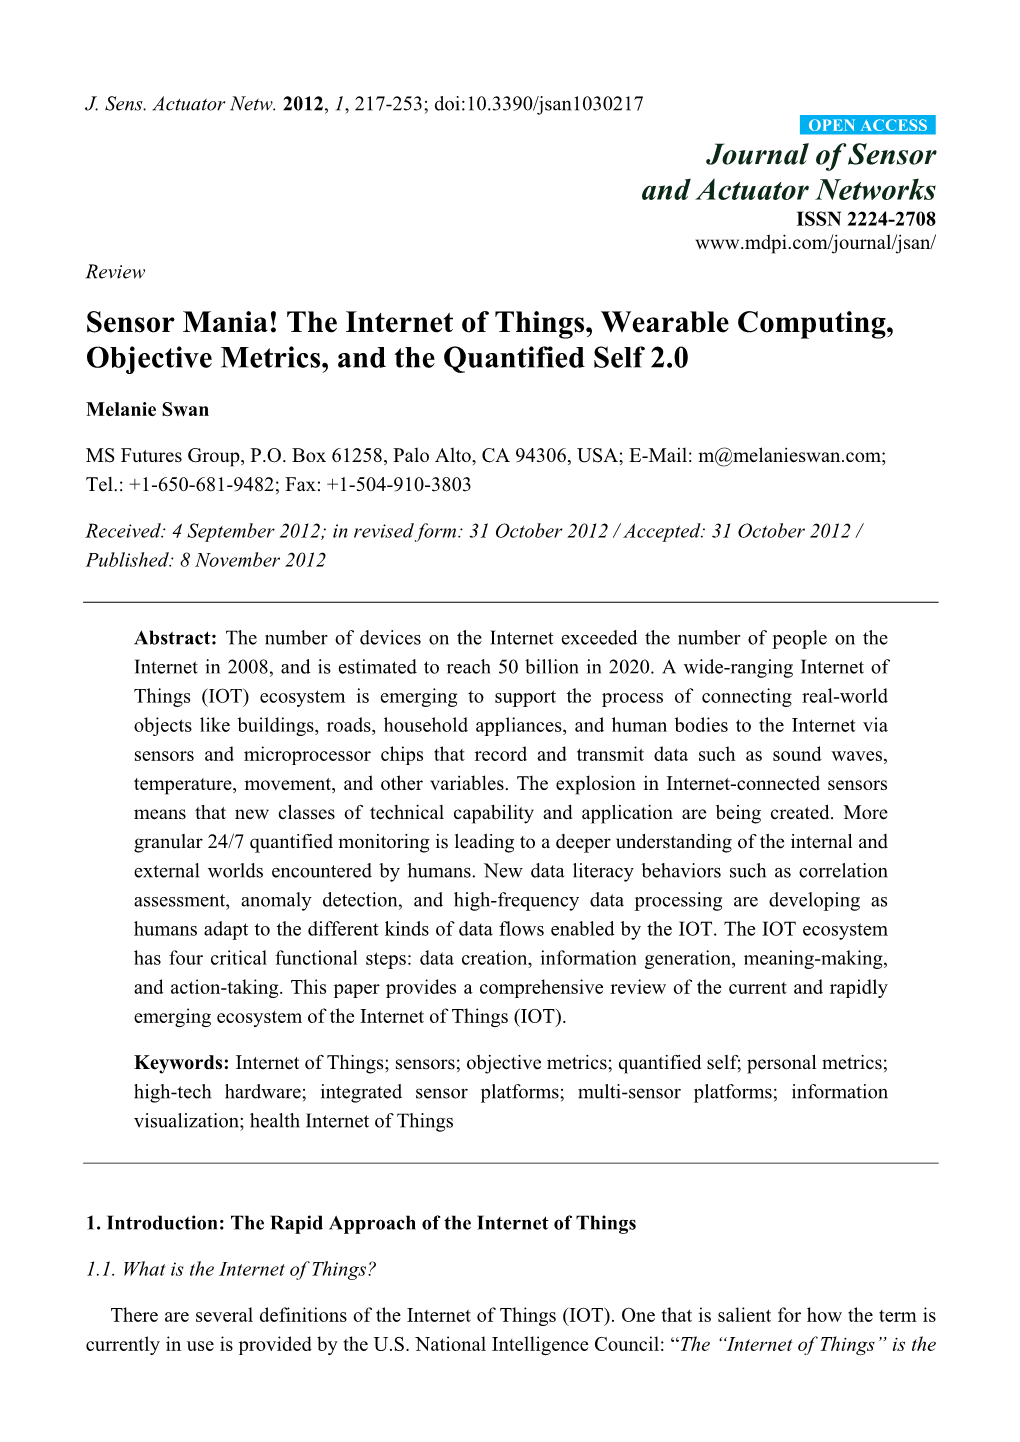 Sensor Mania! the Internet of Things, Wearable Computing, Objective Metrics, and the Quantified Self 2.0